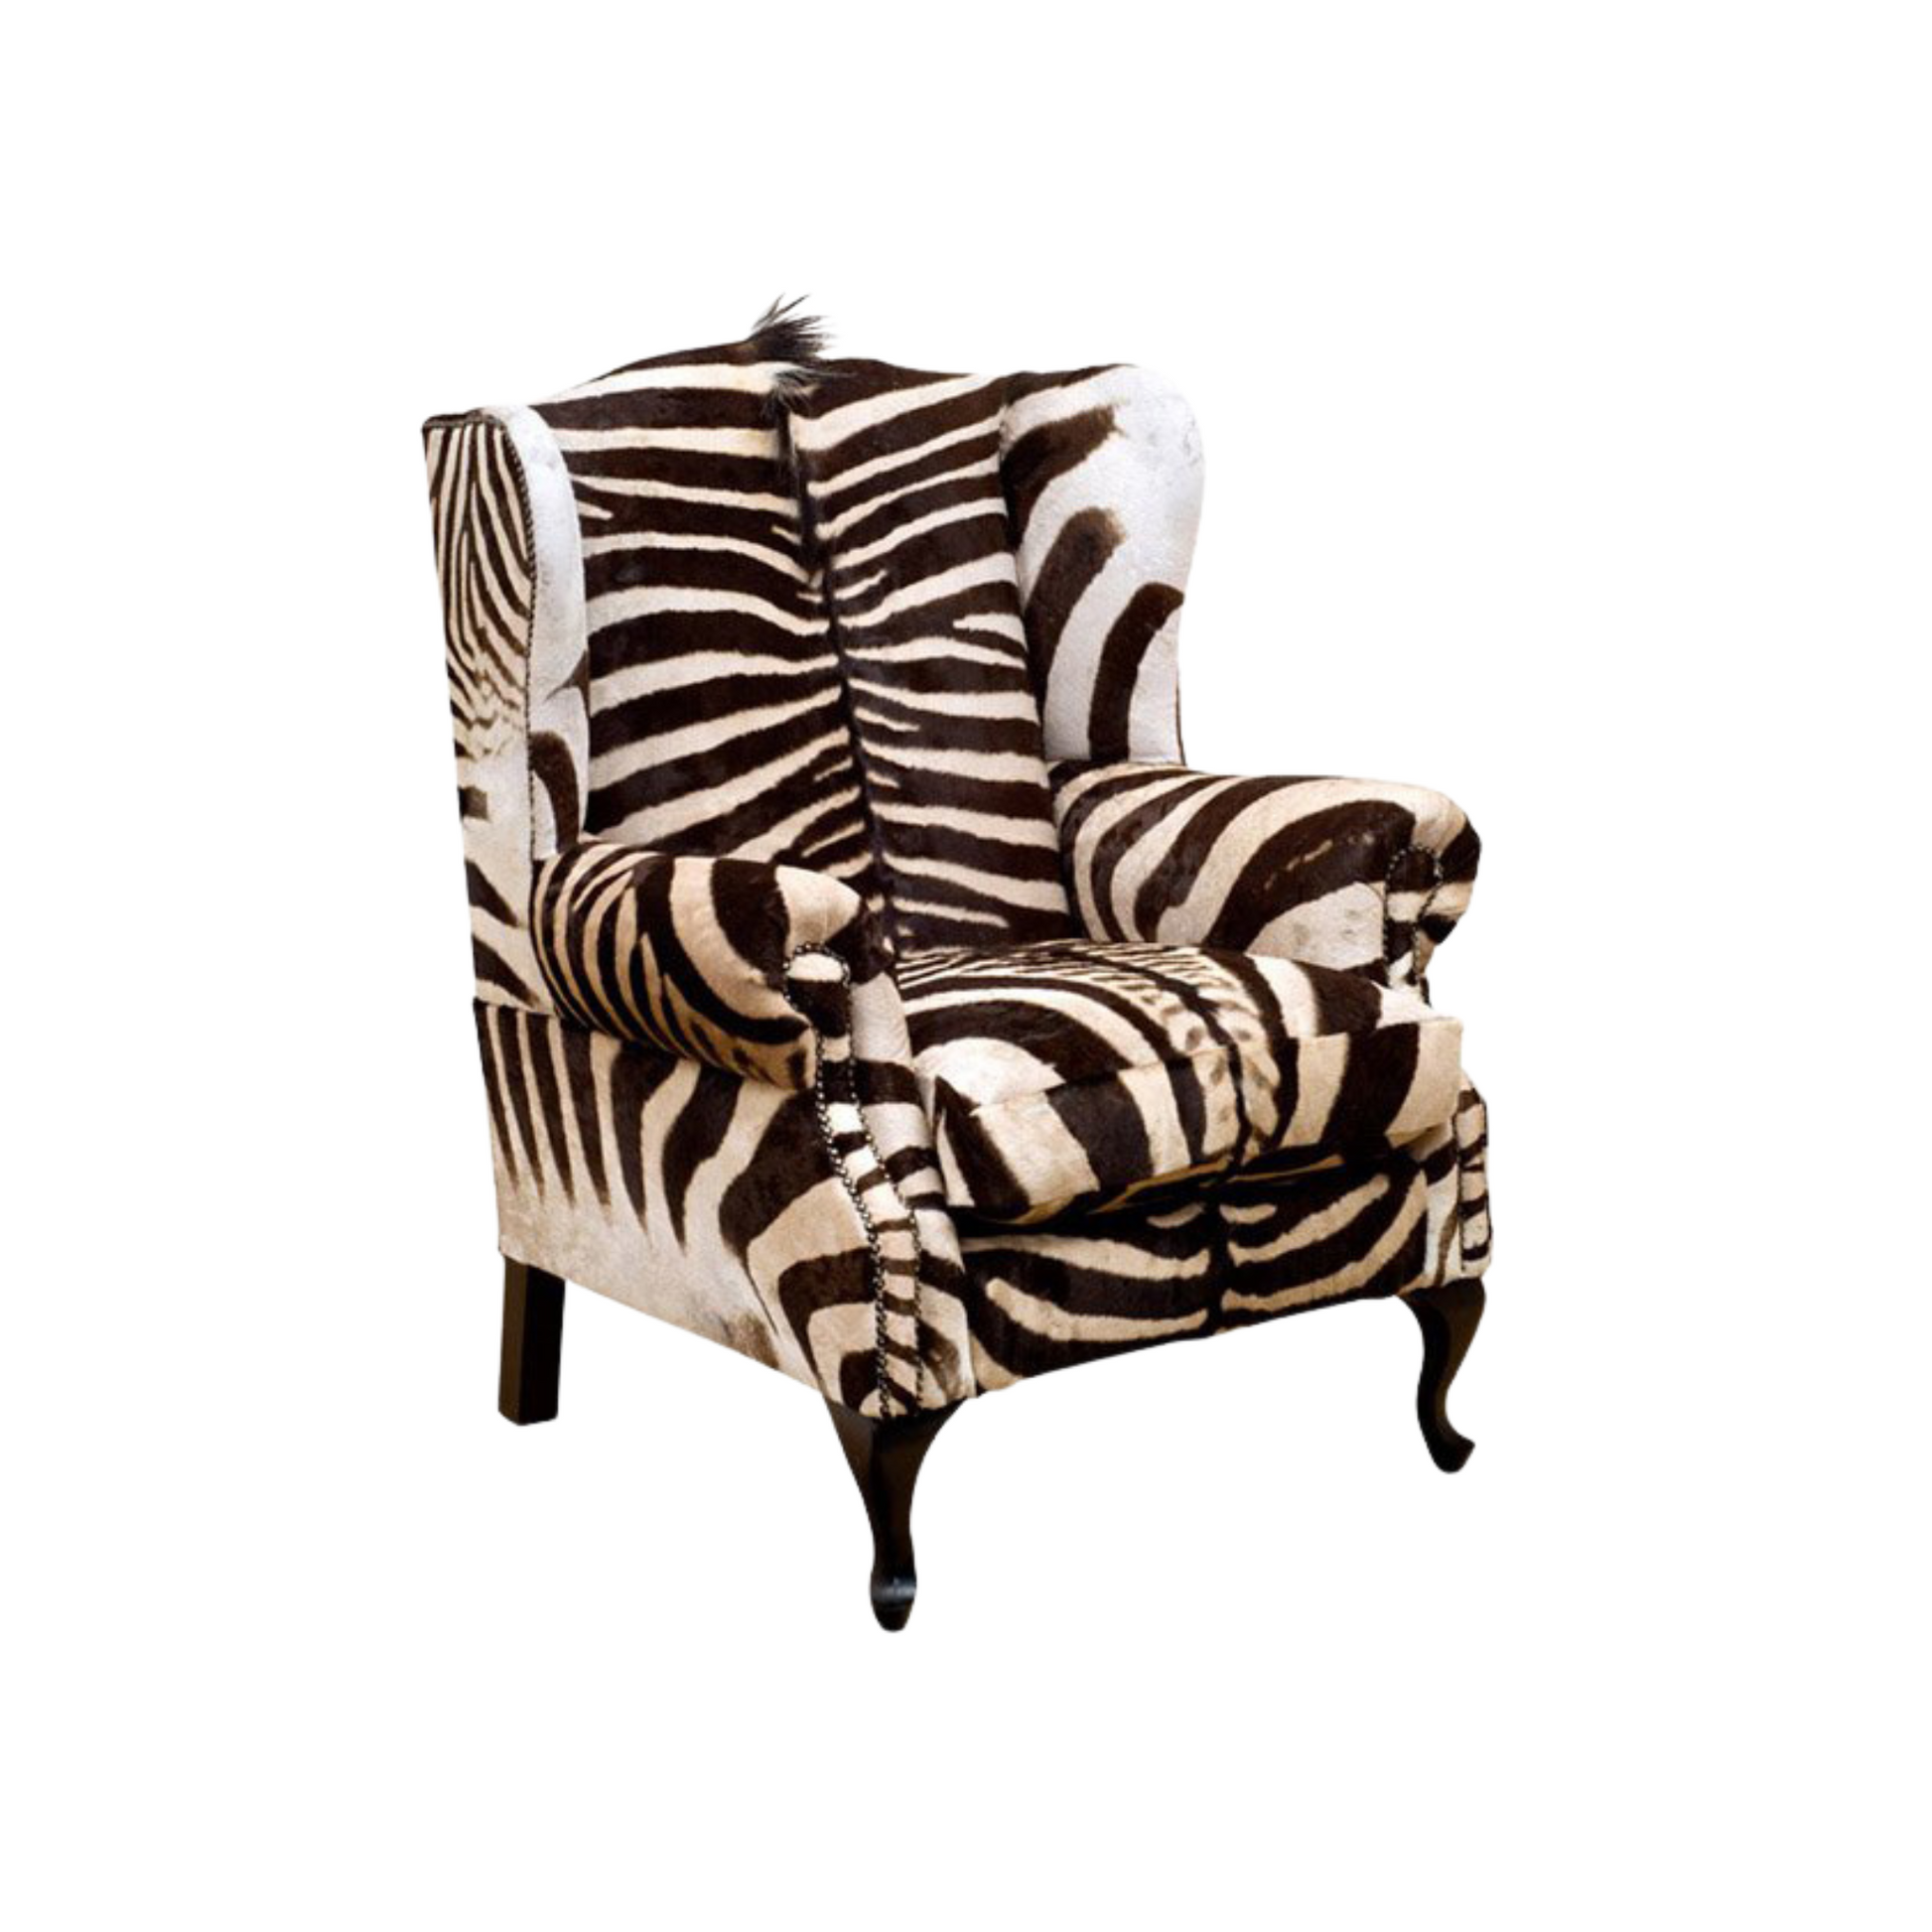 Burchell Zebra Wingback Armchair – An African Statement Masterpiece. Elevate your space with this striking wingback armchair, adorned in Burchell Zebra. Crafted to make a bold statement, it is a unique blend of style and African authenticity.  International export of Burchell Zebra available. Customize this masterpiece with your choice of hair-on hides, skins, or fabrics. Pricing available upon request for a truly bespoke creation.